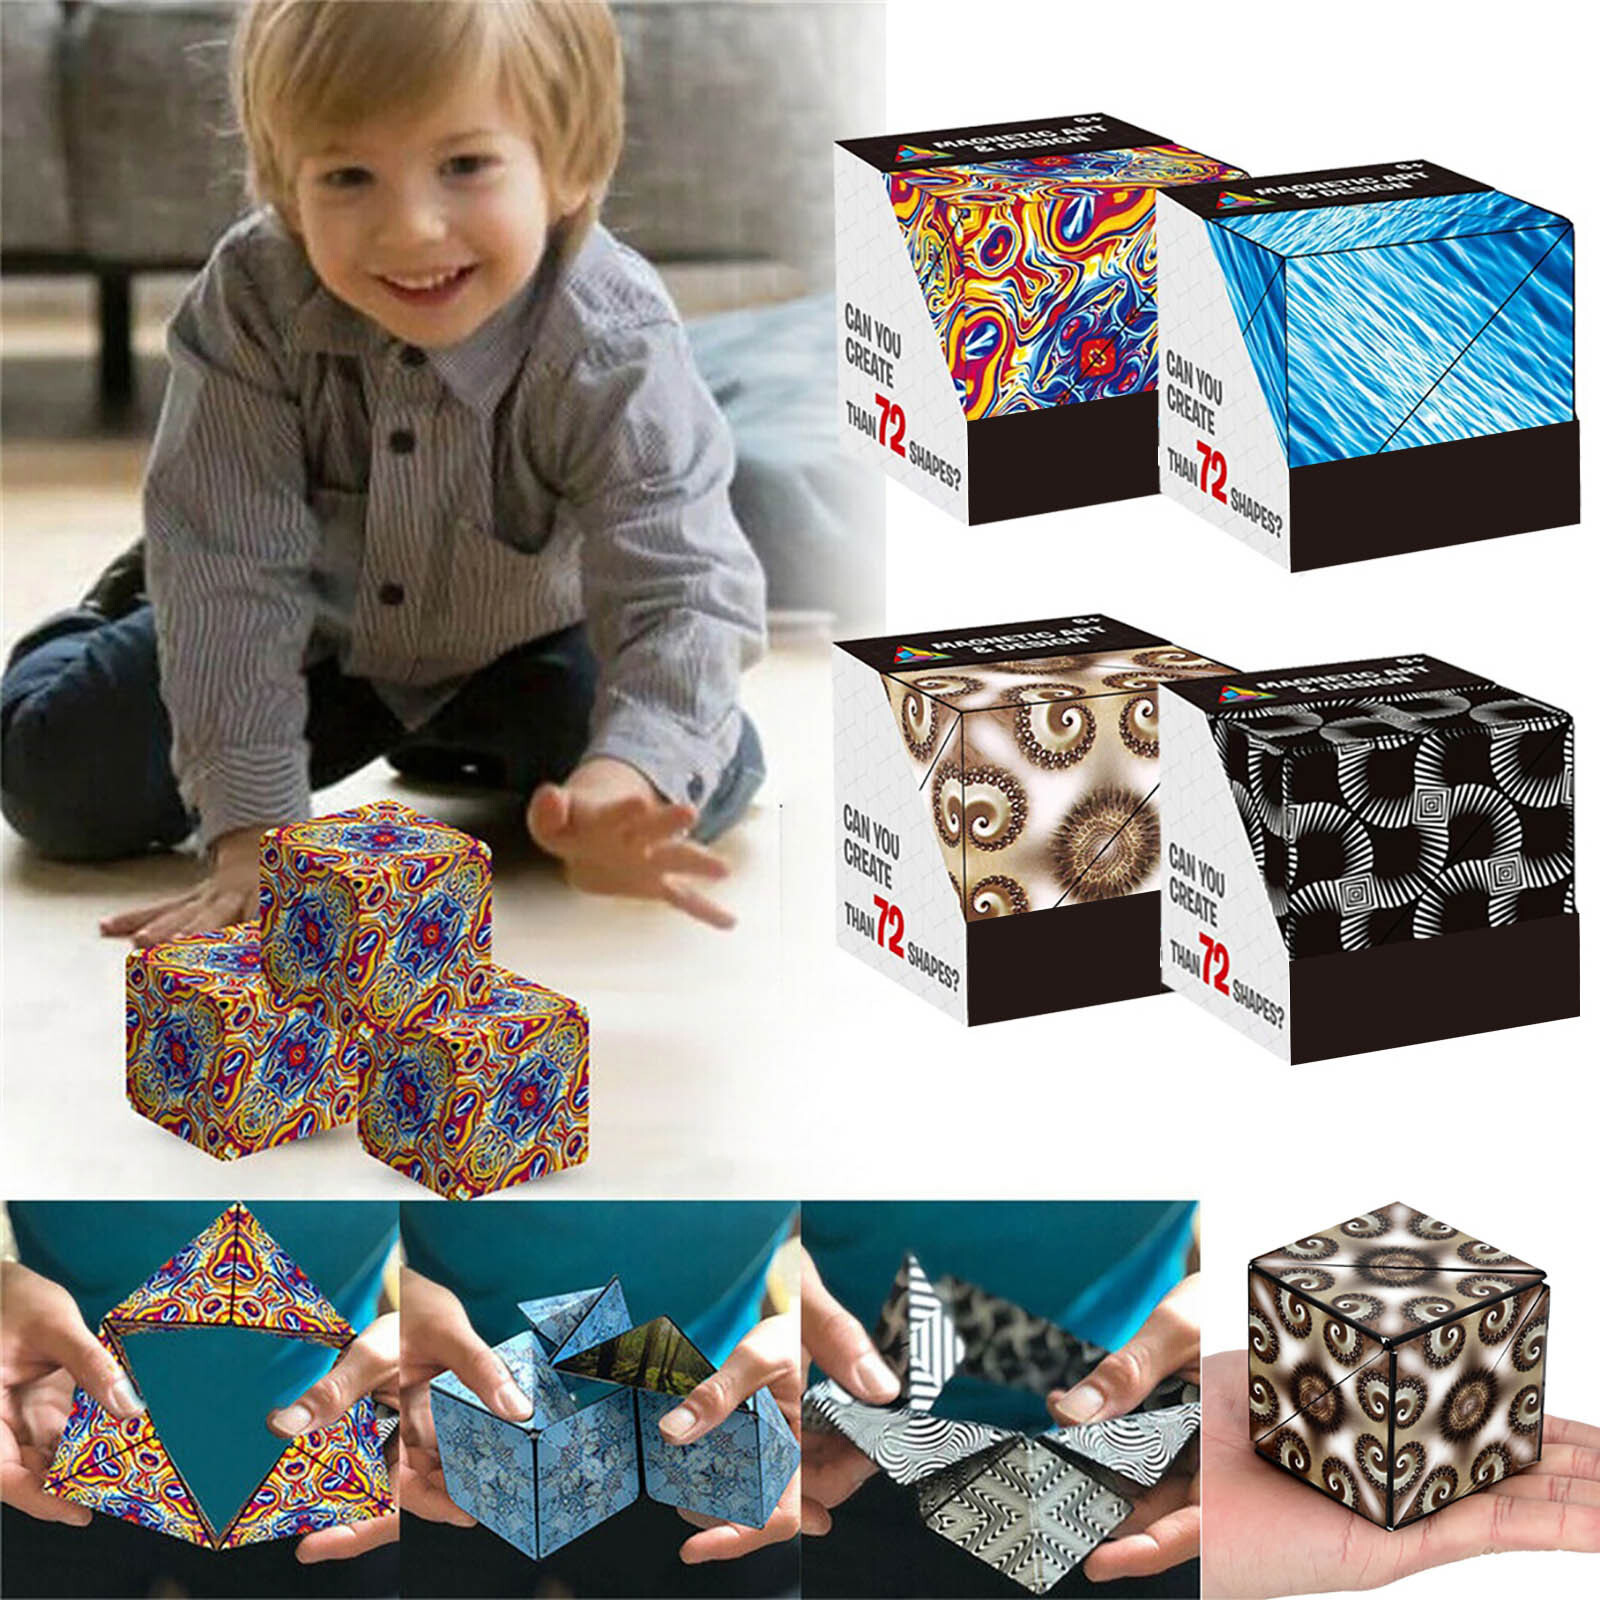 SALES 50% OFF-- Fizz Changeable Magnetic Magic Cube🔥